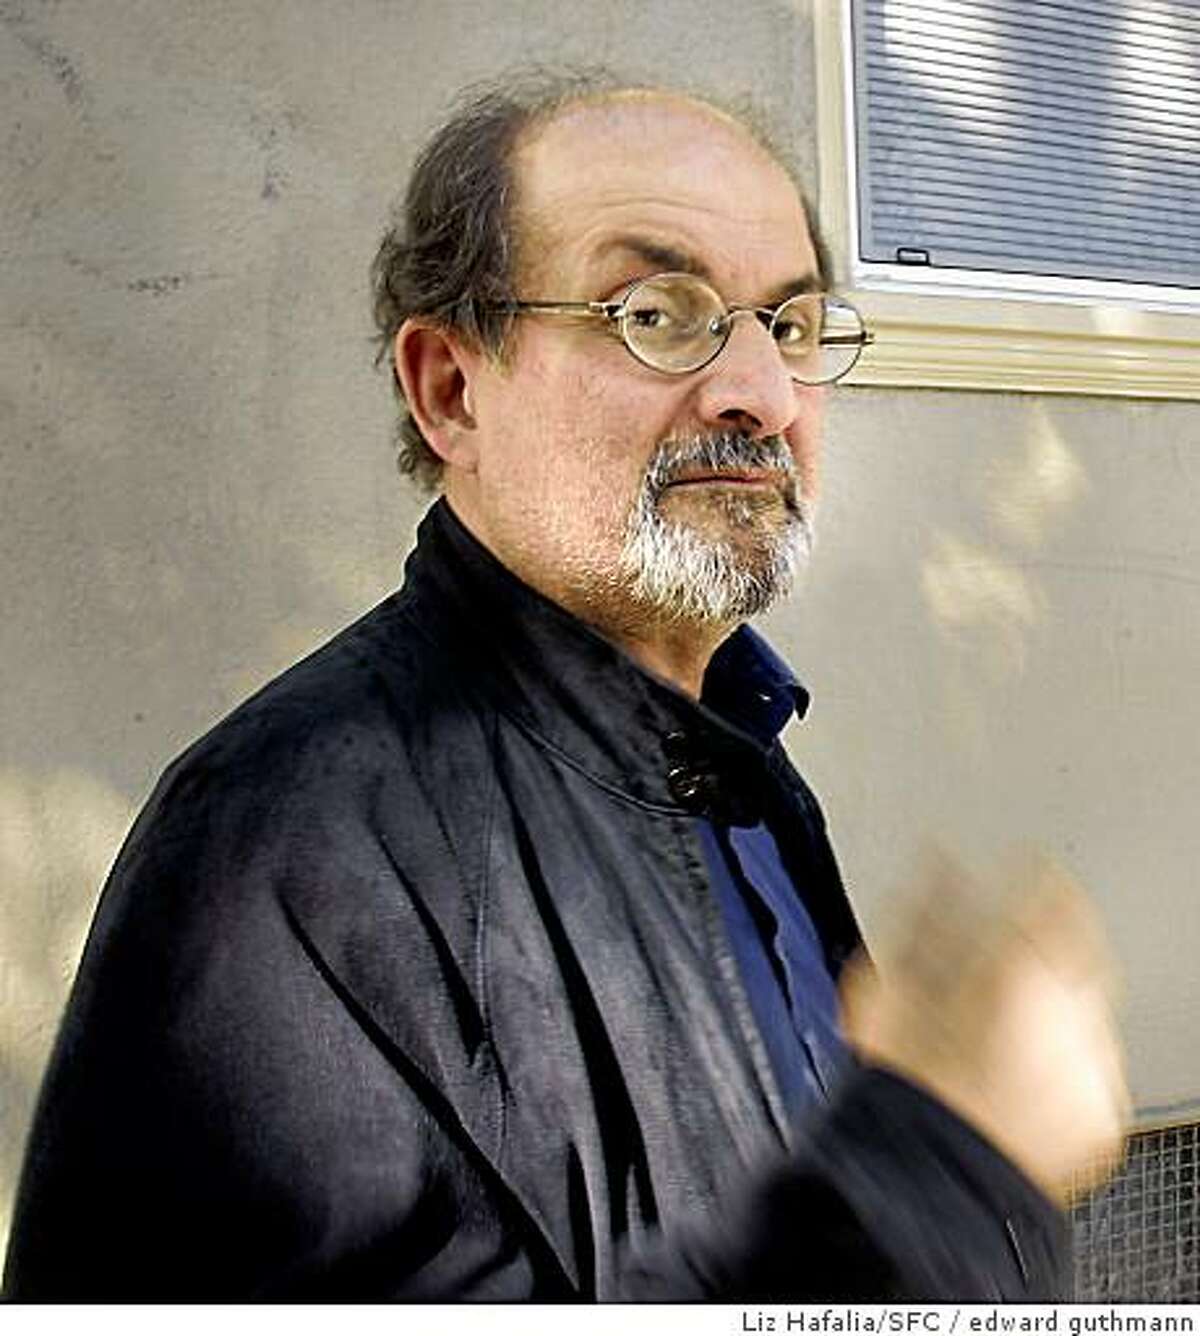 Salman Rusdie will be in conversation with Michael Krasney, 8p.m. at the Herbst Theatre in San Francisco, June 18, 2008.